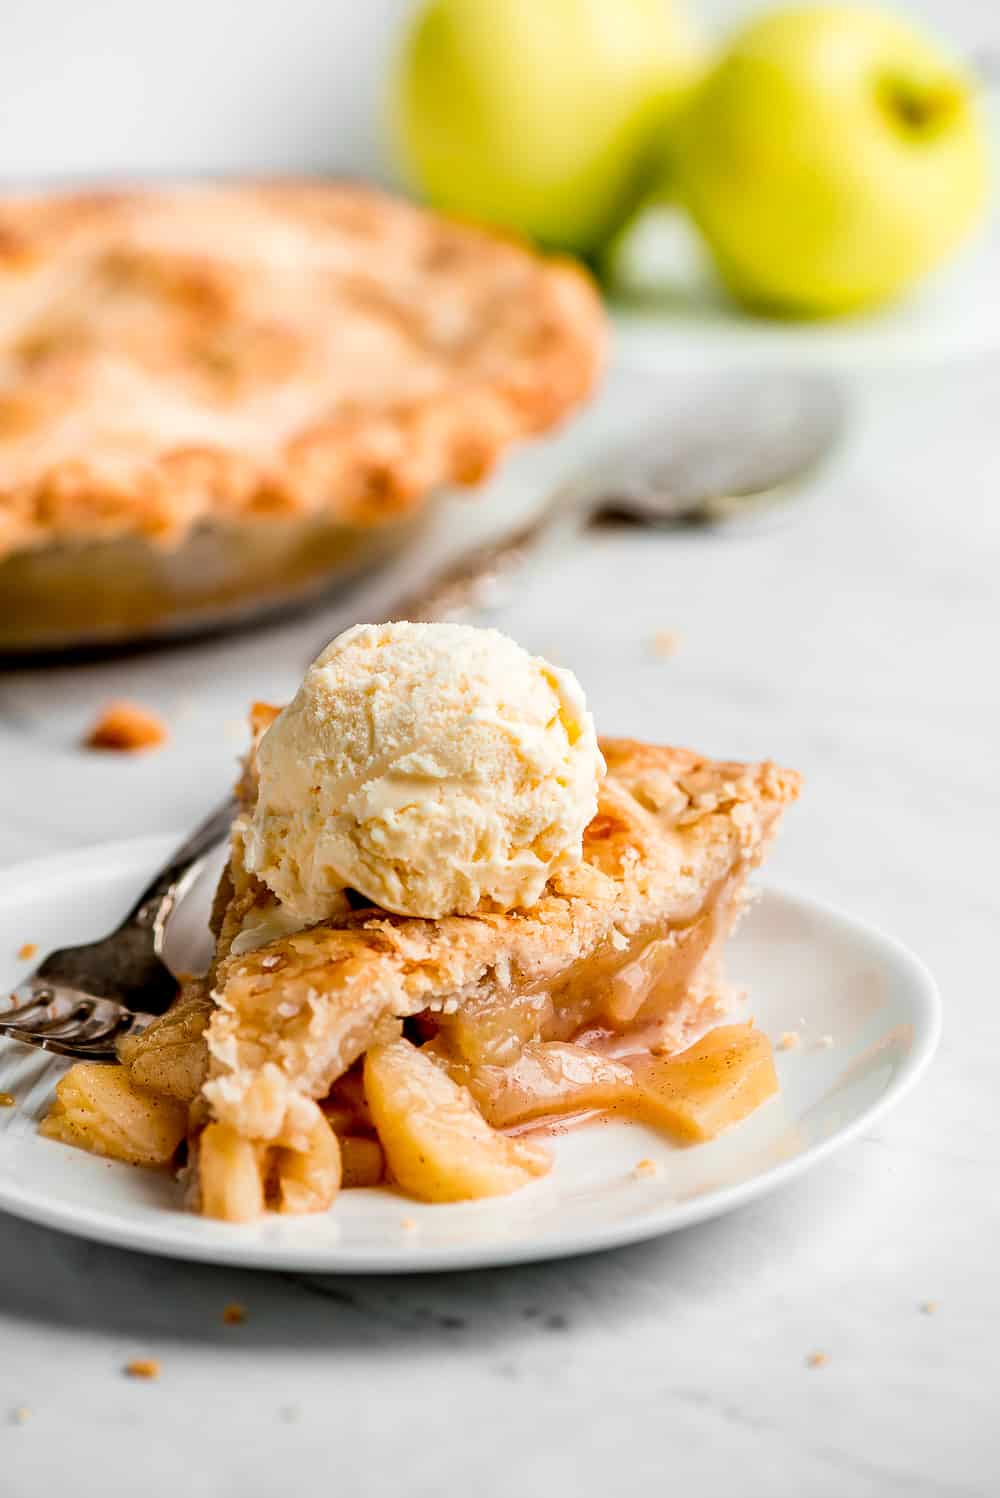 Apple Pie is a classic American favorite that is sure to hit everyone’s dining room table each fall. The buttery flaky crust, sweet-tart apple filling, and warm cinnamon aroma makes this a slice of heaven